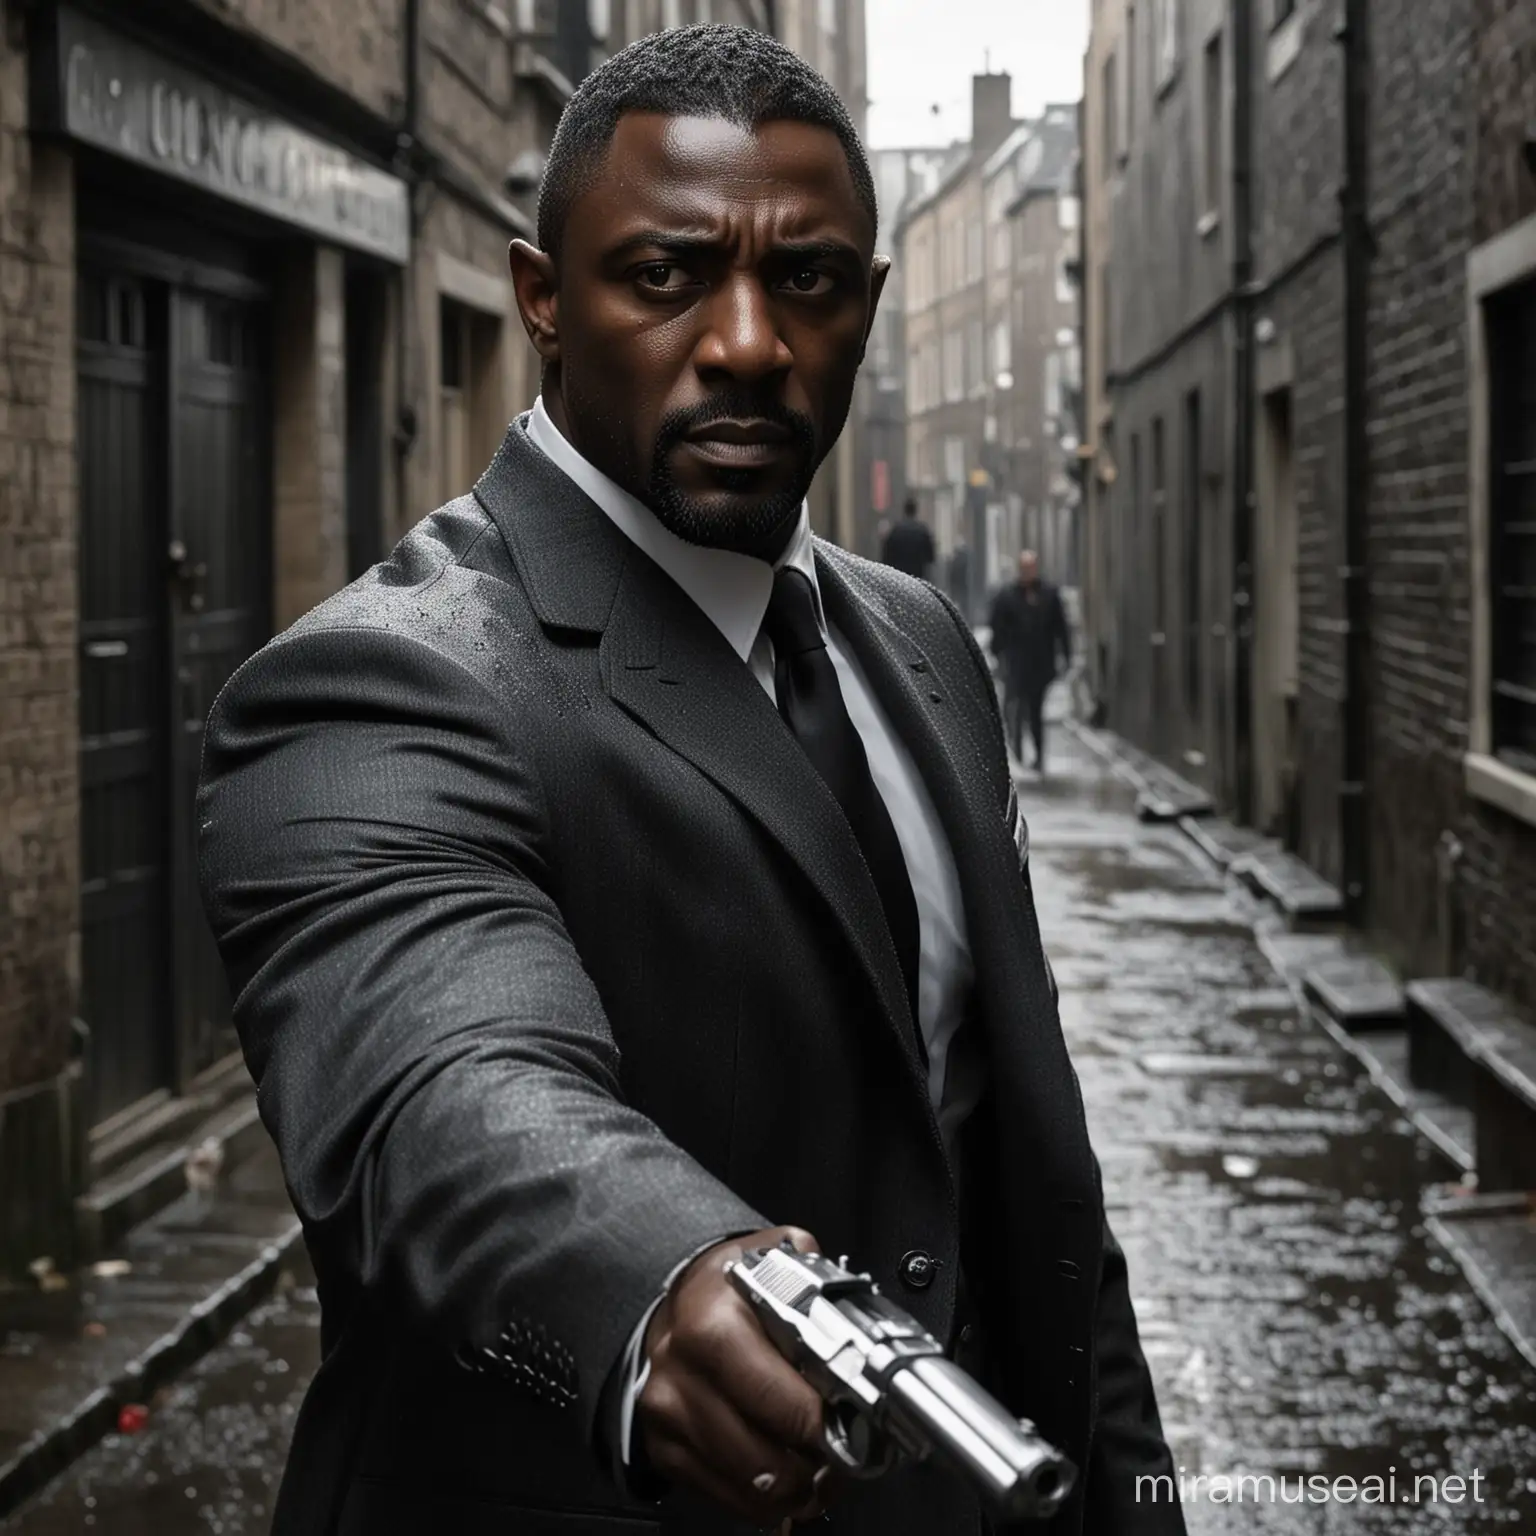 In a dimly lit alleyway, rain drizzles down, casting a glistening sheen on the cobblestones. Suddenly, from the shadows emerges Idris Elba as James Bond, his sleek silhouette illuminated by a distant streetlight. With purposeful strides, he moves forward, his steely gaze fixed ahead, a gun clasped firmly in his hand.

Elba's Bond exudes confidence and determination, his tailored suit clinging to his muscular frame, the epitome of suave sophistication and deadly efficiency. As he approaches, the camera captures the glint of steel in his piercing eyes, reflecting his unwavering resolve and unwavering commitment to his mission.

With lightning-fast reflexes, Bond raises his gun, the metallic click echoing through the alleyway. In one fluid motion, he takes aim, his expression a perfect blend of intensity and cool composure. Every movement is calculated, every gesture deliberate, as he prepares to confront the unknown threat lurking in the darkness.

In this moment, Idris Elba's James Bond is a force to be reckoned with, a master of espionage and intrigue, ready to face whatever dangers lie ahead. With his gun raised and his senses sharpened, he stands as a beacon of strength and resilience, poised to defend against any adversary that dares to challenge him.